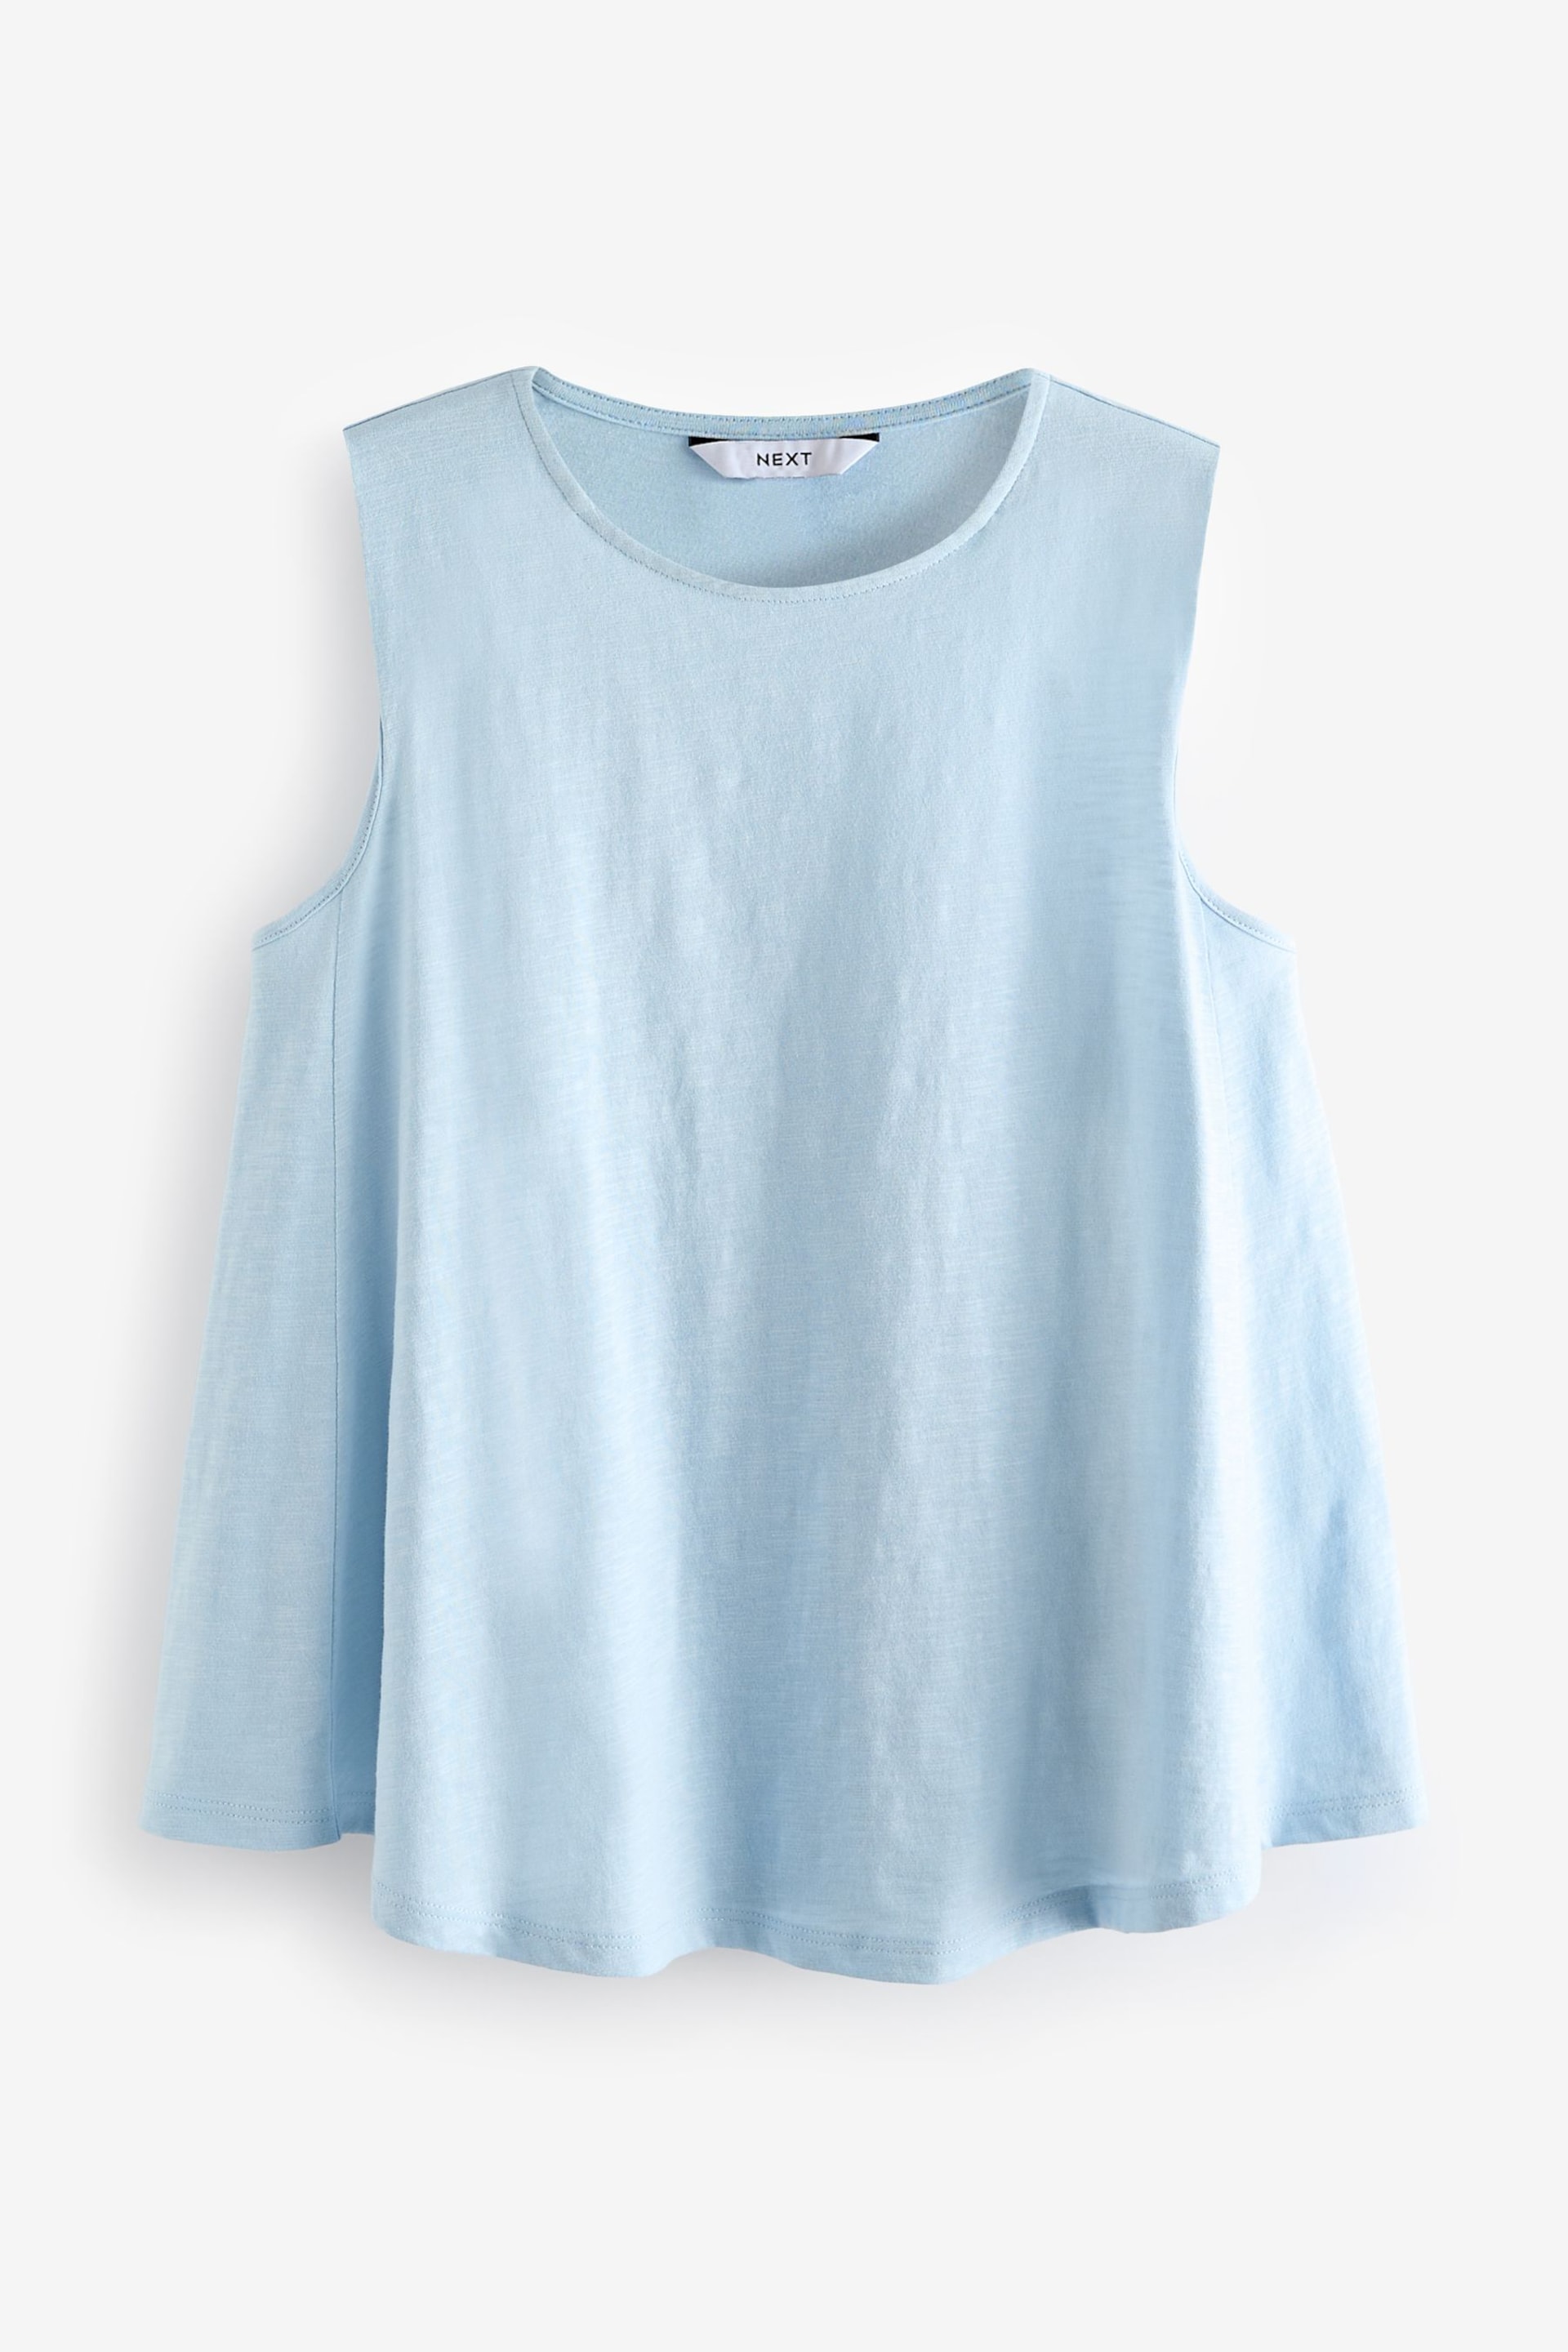 Light Blue Relaxed Fit Sleeveless Scoop Neck Slub Vest Top - Image 5 of 6